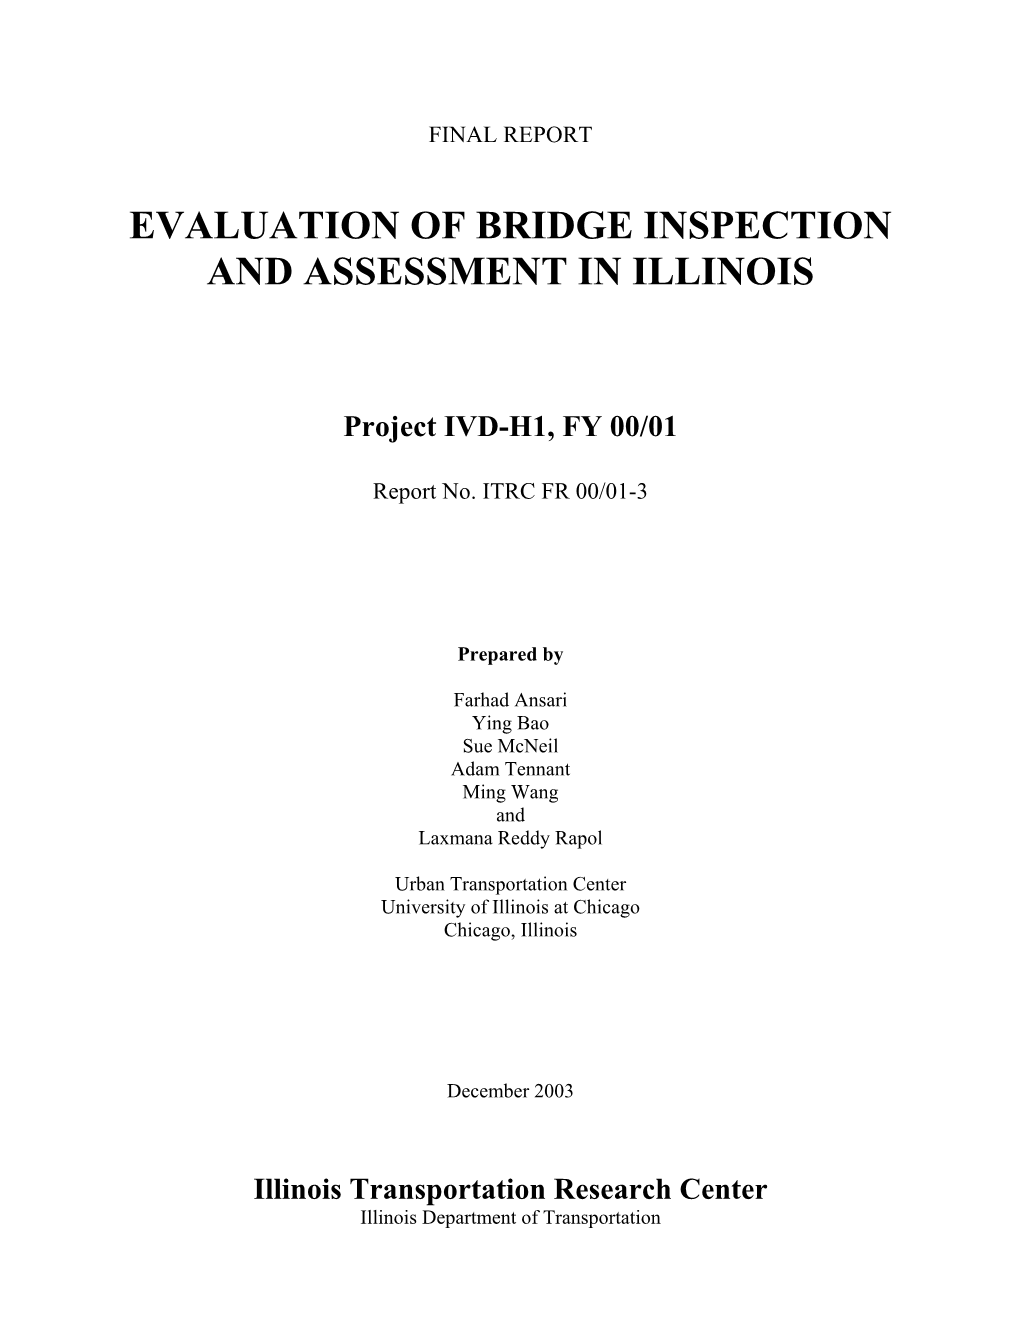 Evaluation of Bridge Inspection and Assessment in Illinois